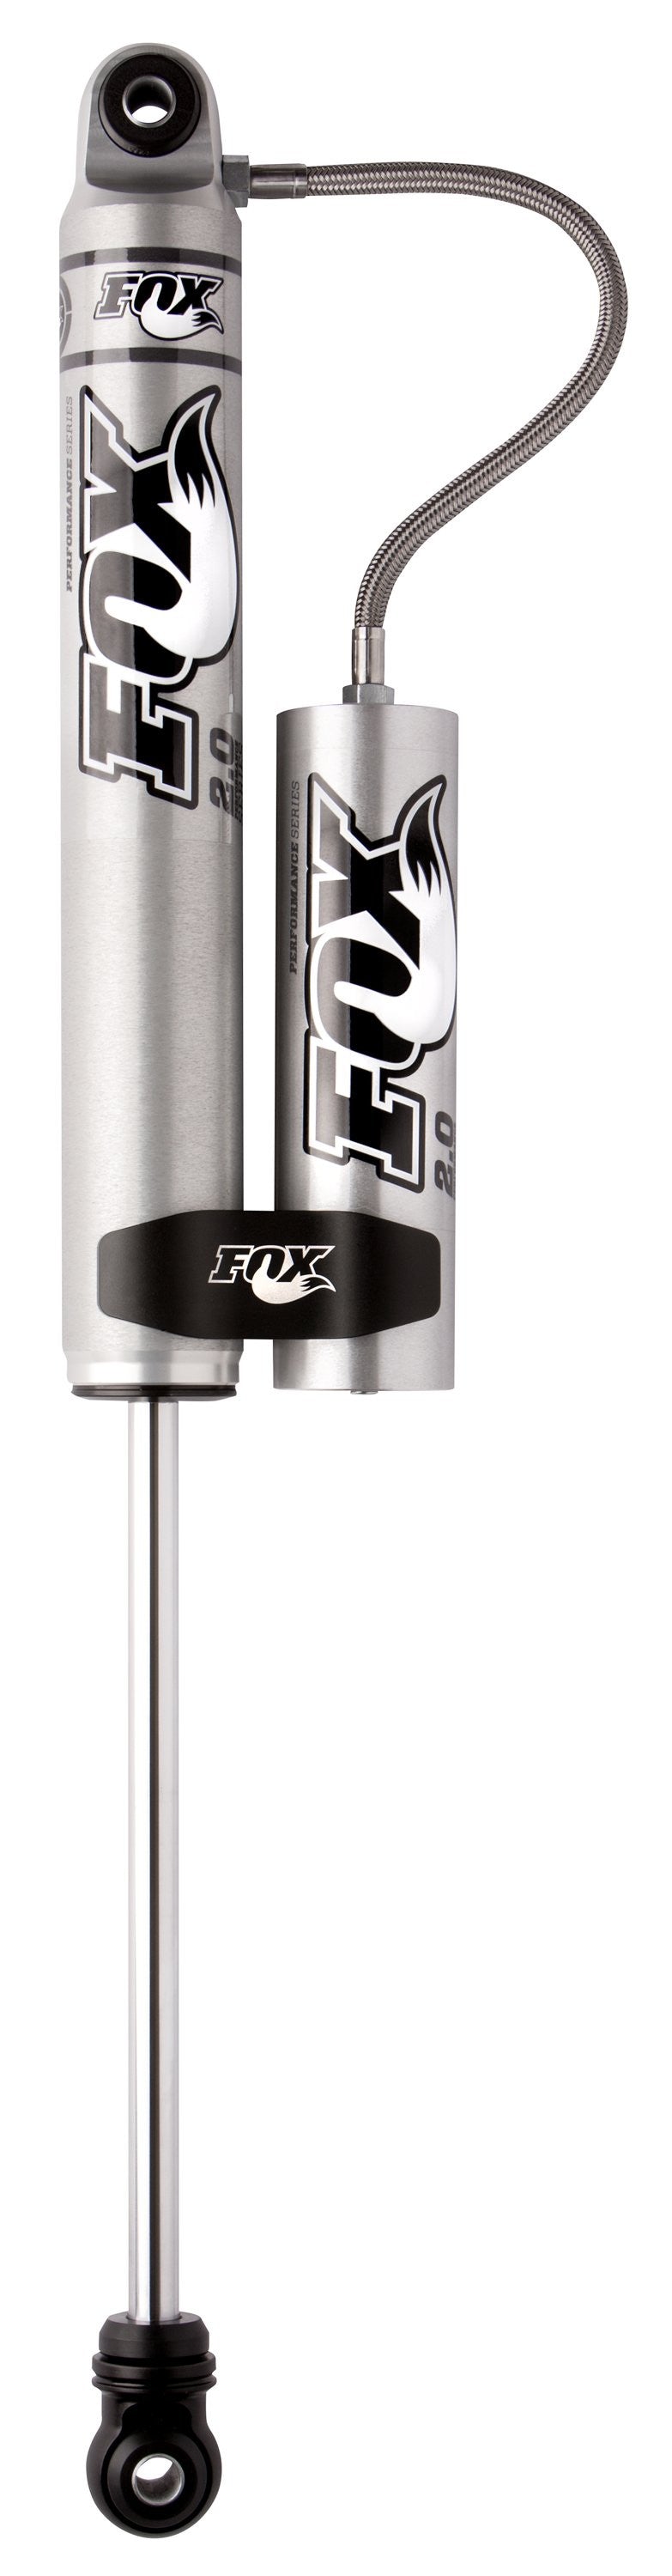 PERFORMANCE SERIES 2.0 SMOOTH BODY RESERVOIR SHOCK Lift: 4.5-5.5 2005-2016 Ford F-550 Super Duty FOX-985-24-104 - 2.0 SHOCK - FOX Offroad Shocks - Texas Complete Truck Center